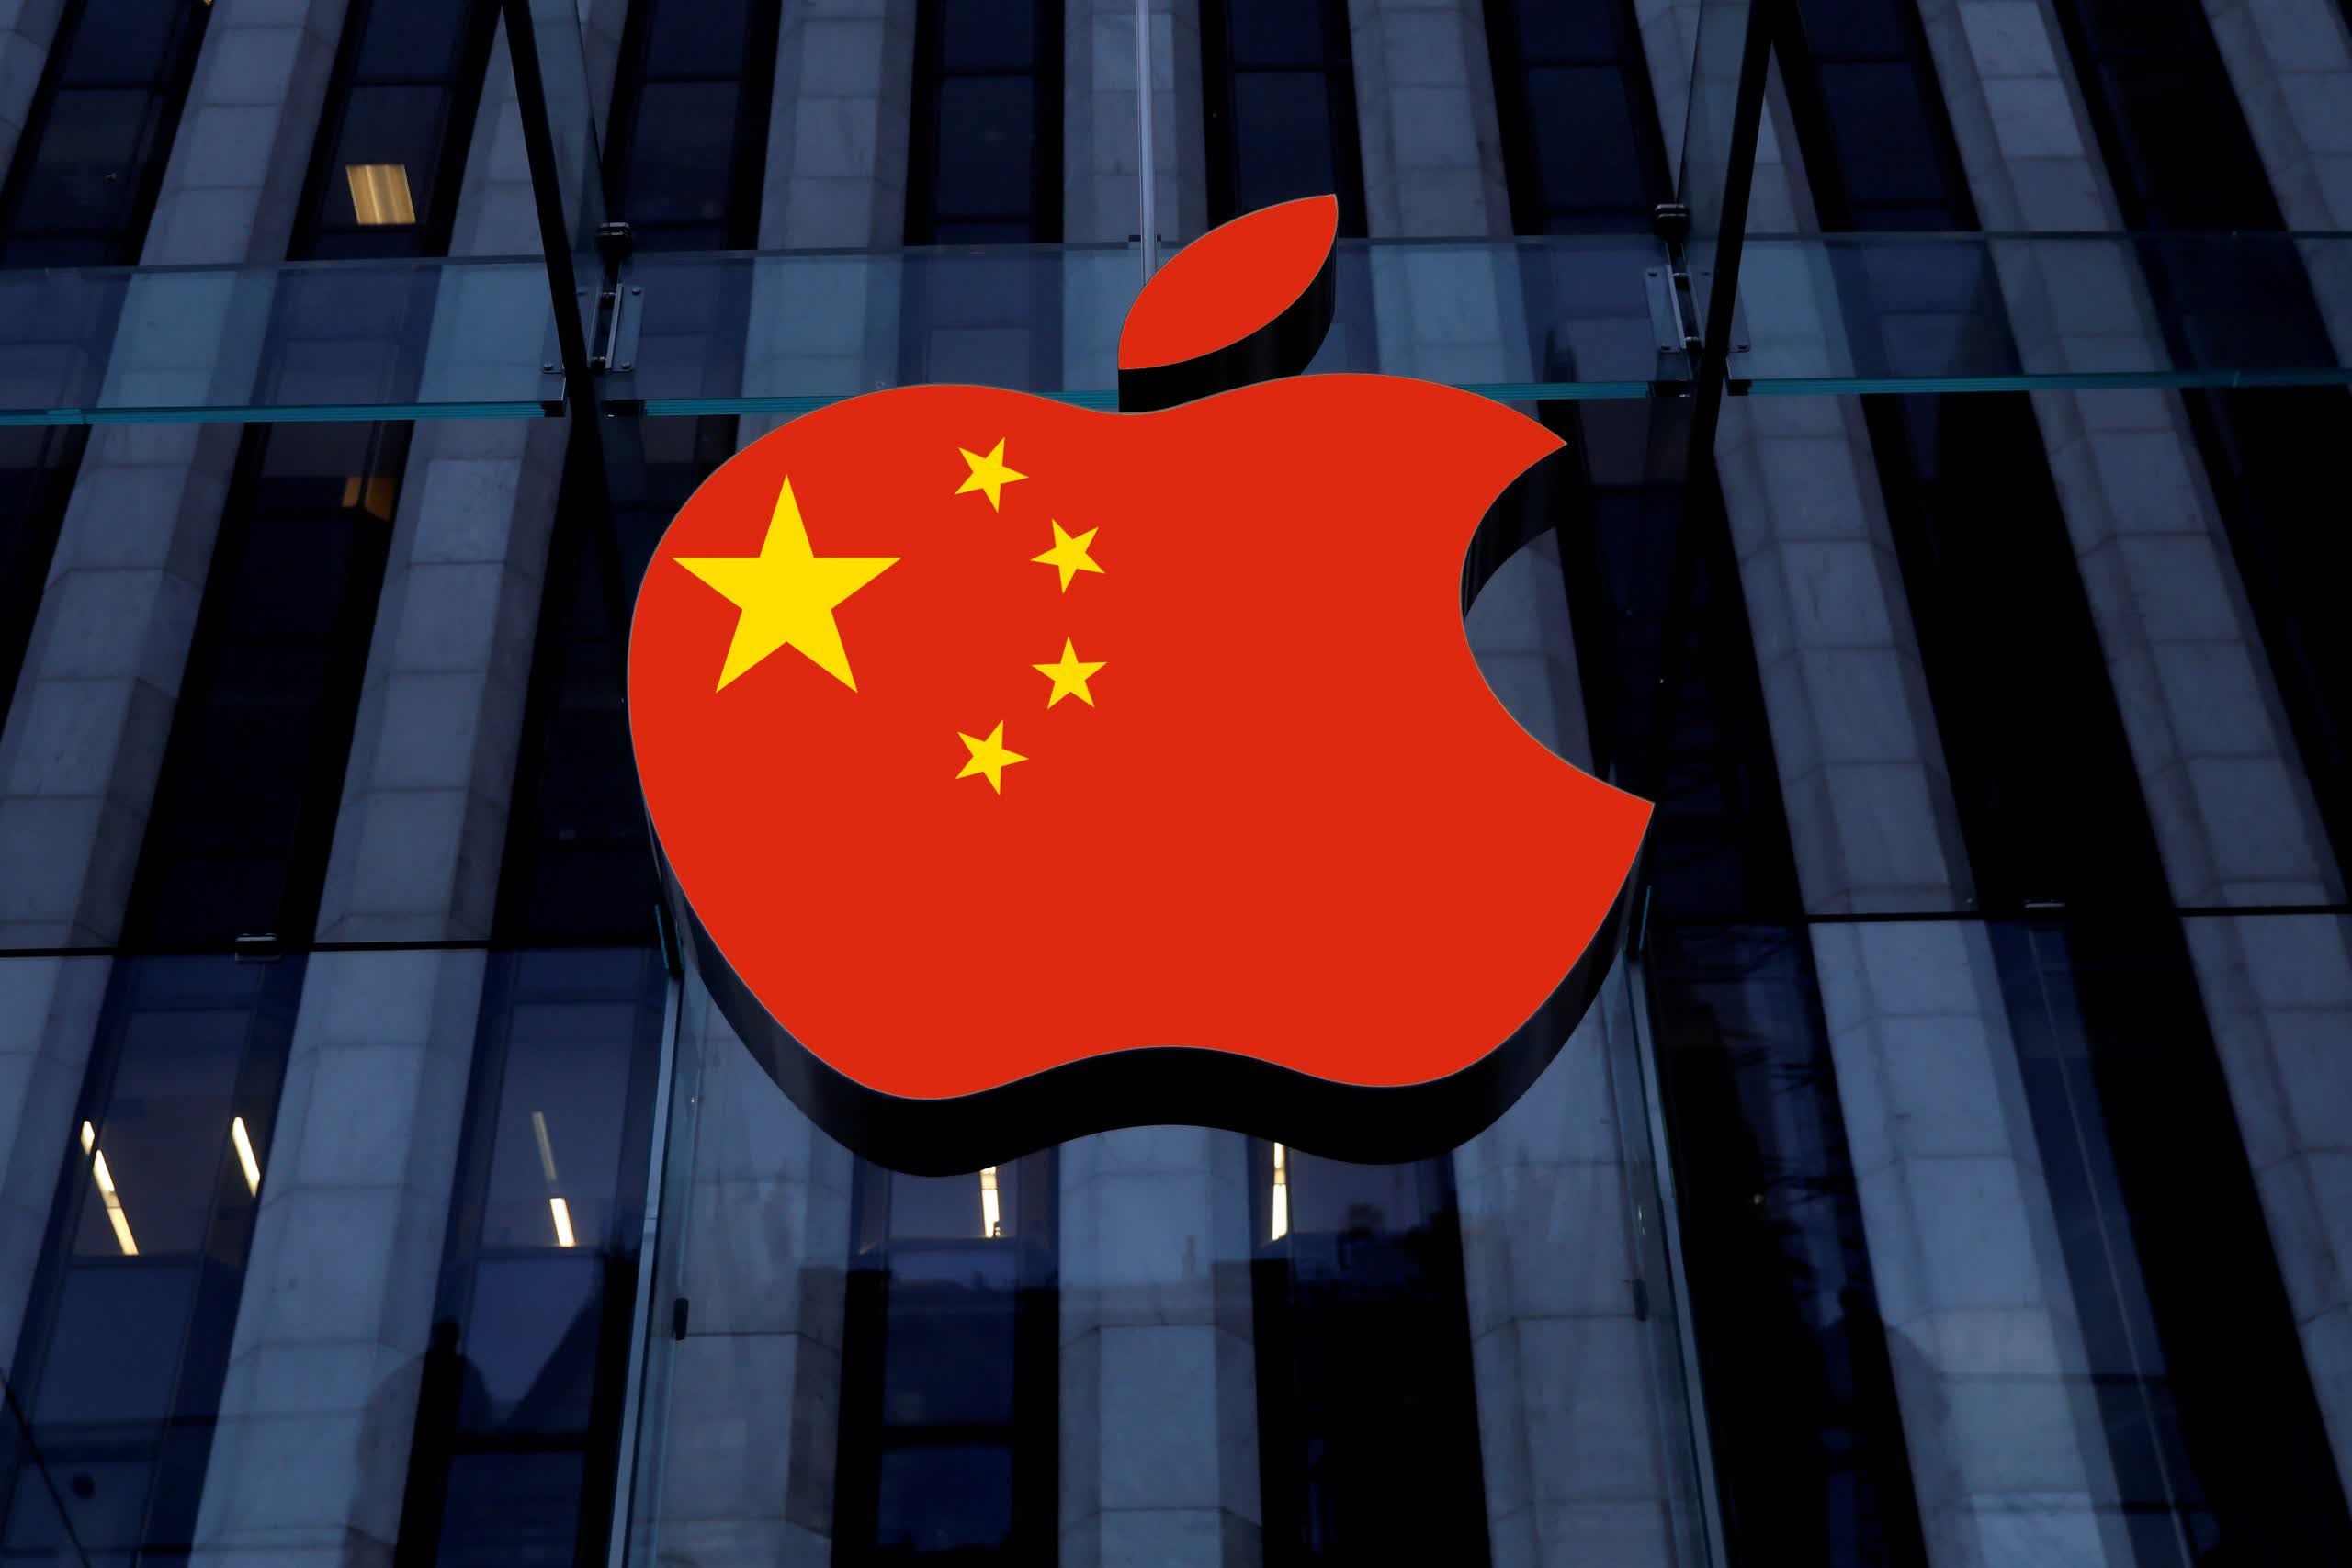 Apple shares fall after China expands iPhone ban to more government offices and agencies